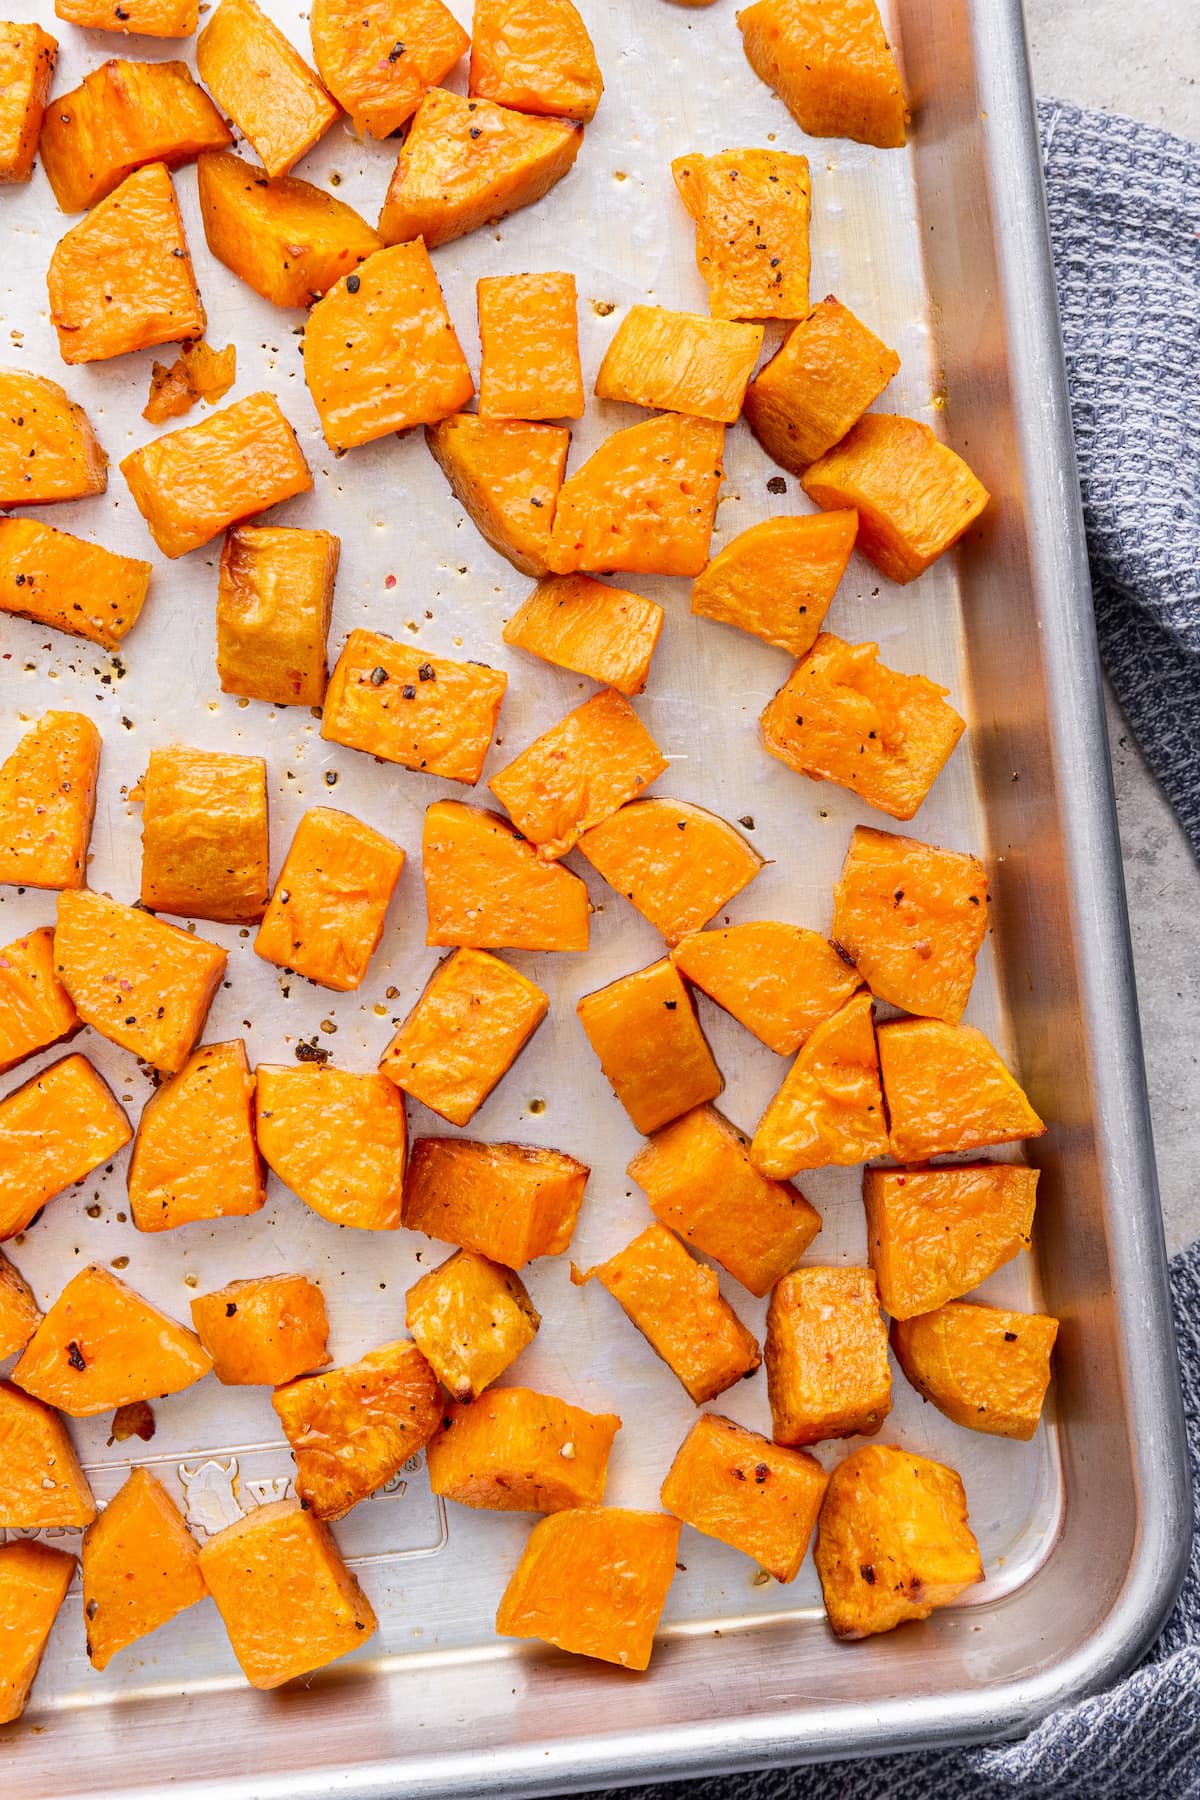 Cubed roasted sweet potatoes on a baking tray.